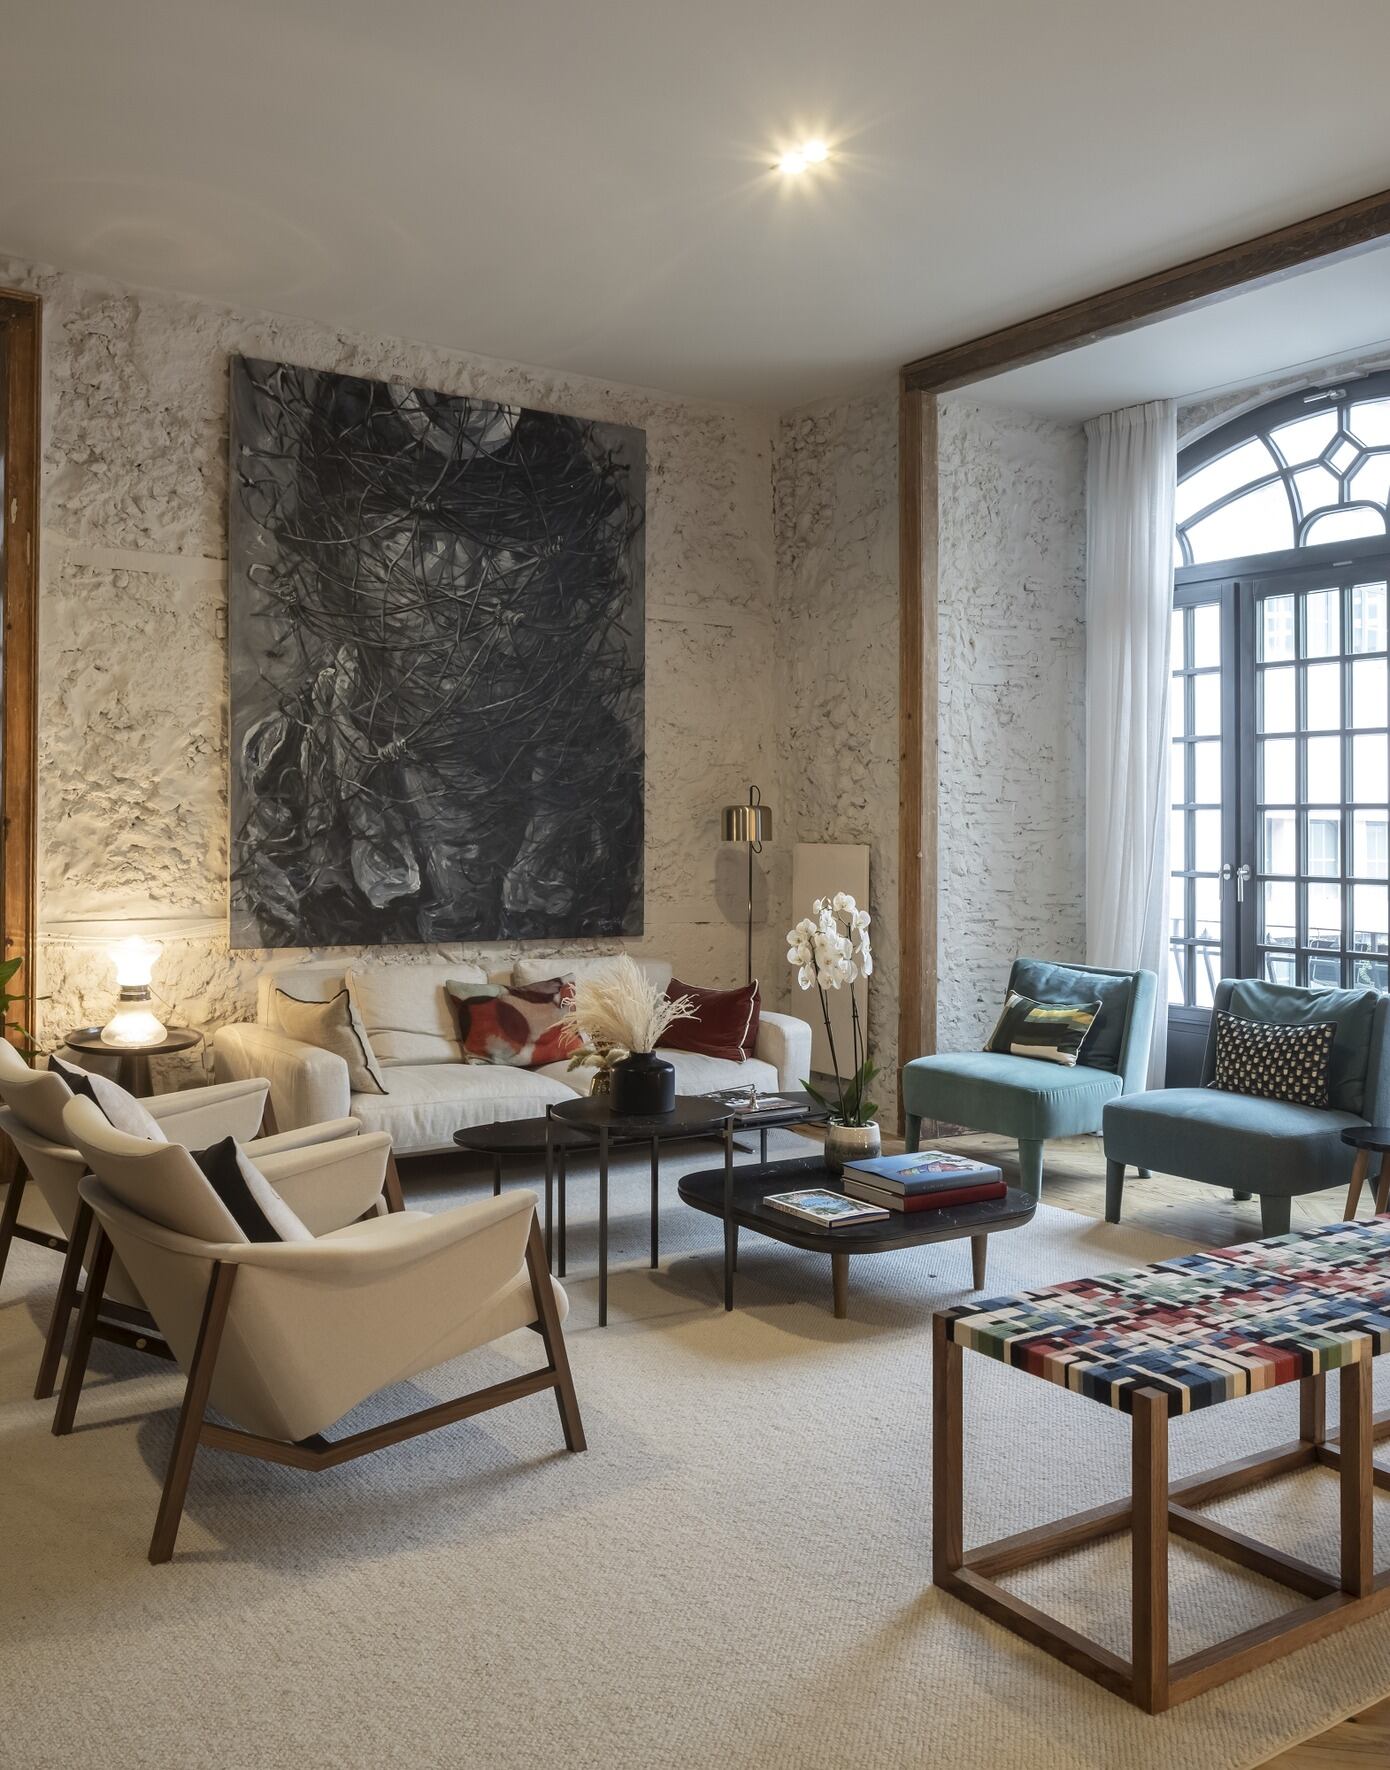 Apartment in Cais do Sodré: Lisbon’s Blend of Classic Design and Modern Aesthetics